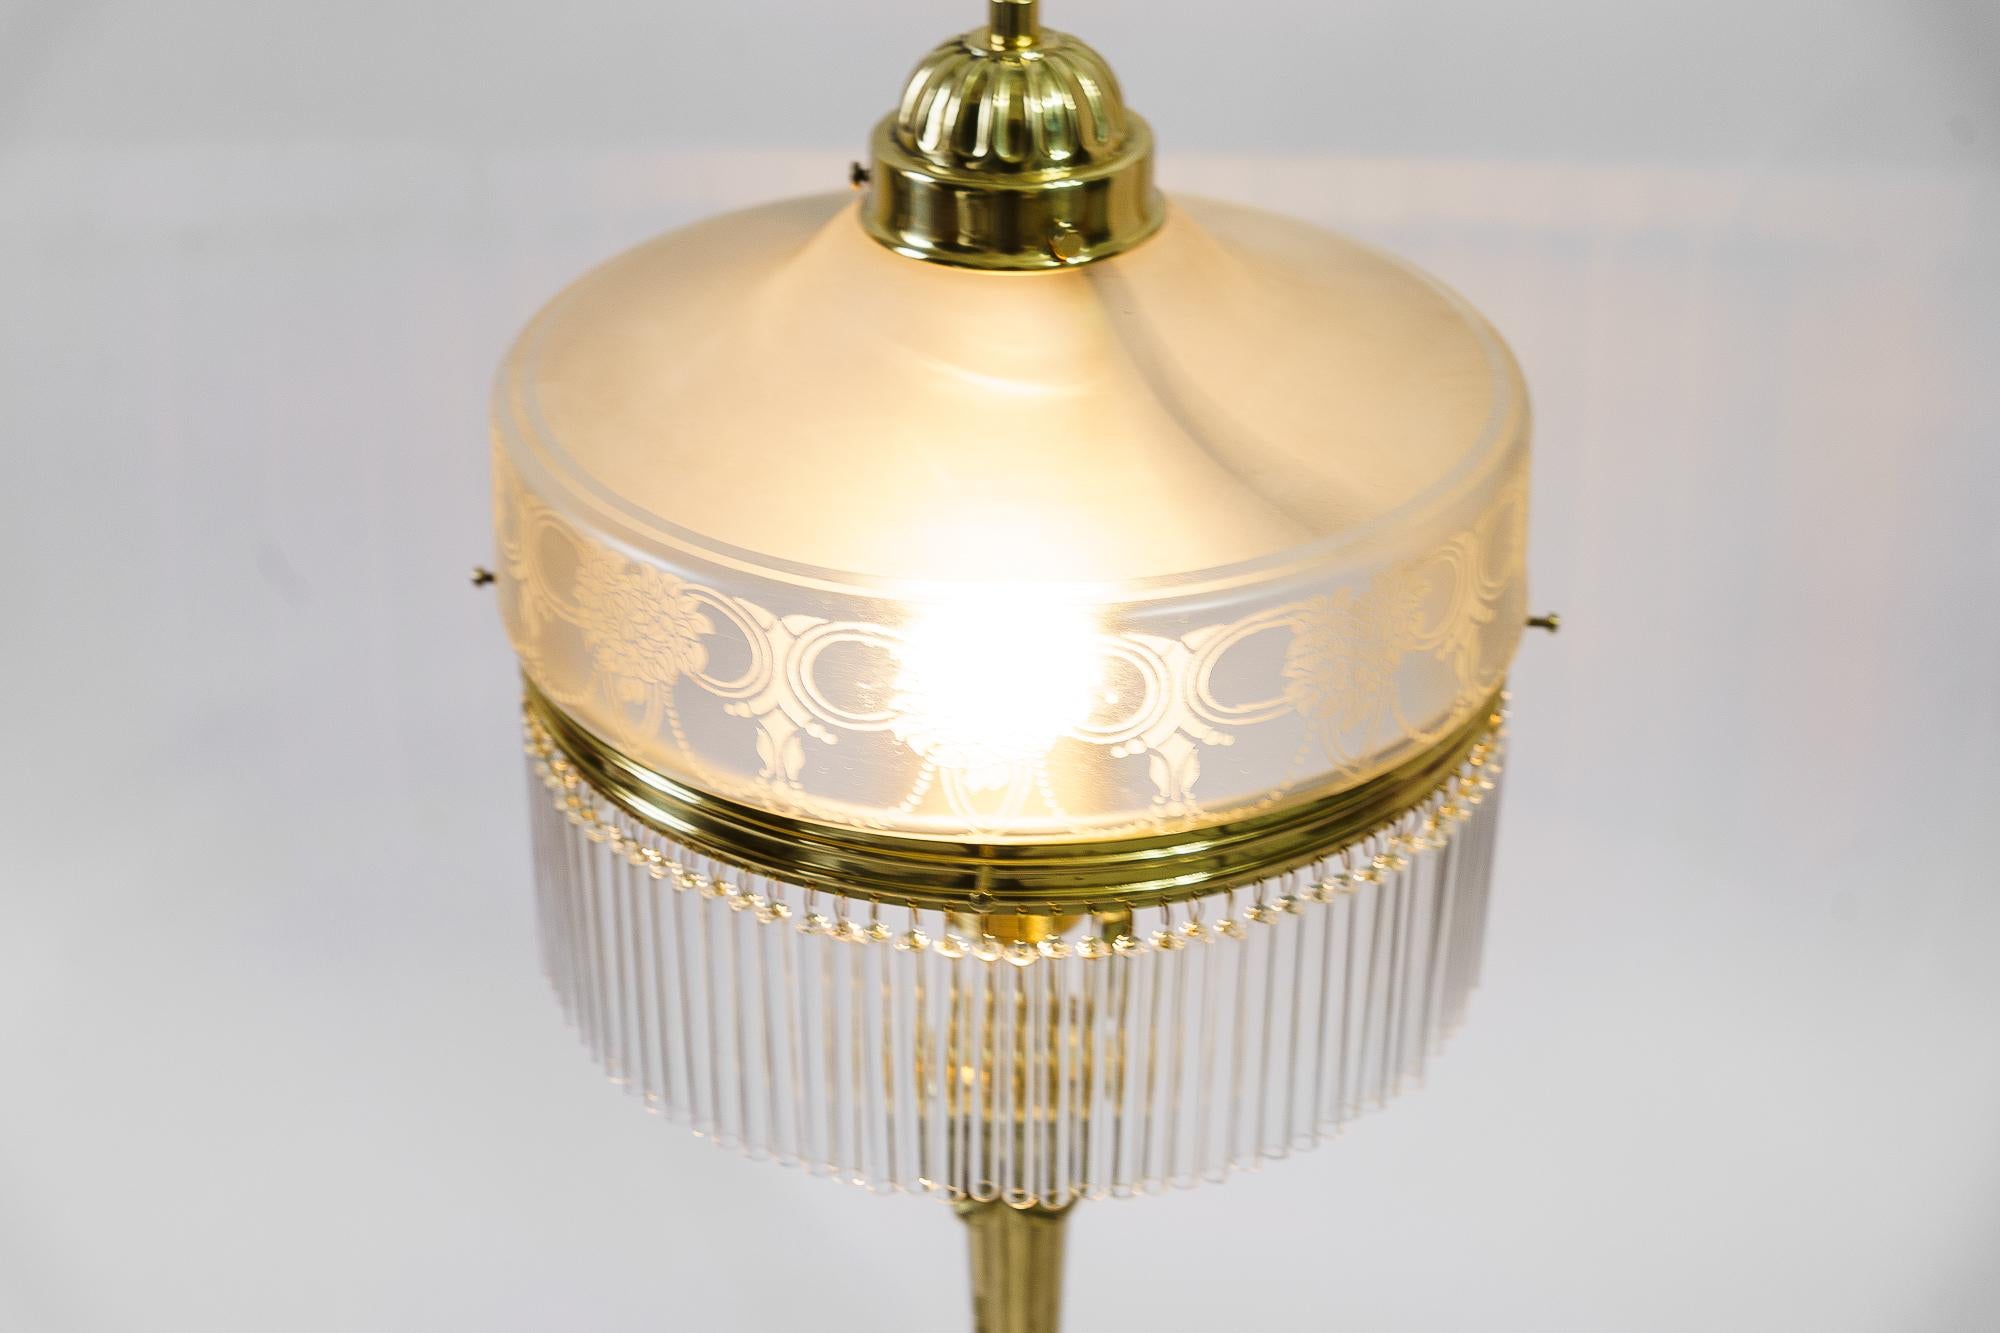 Floral Jugendstil Table Lamp with Glass Shade Vienna Around 1908 For Sale 2